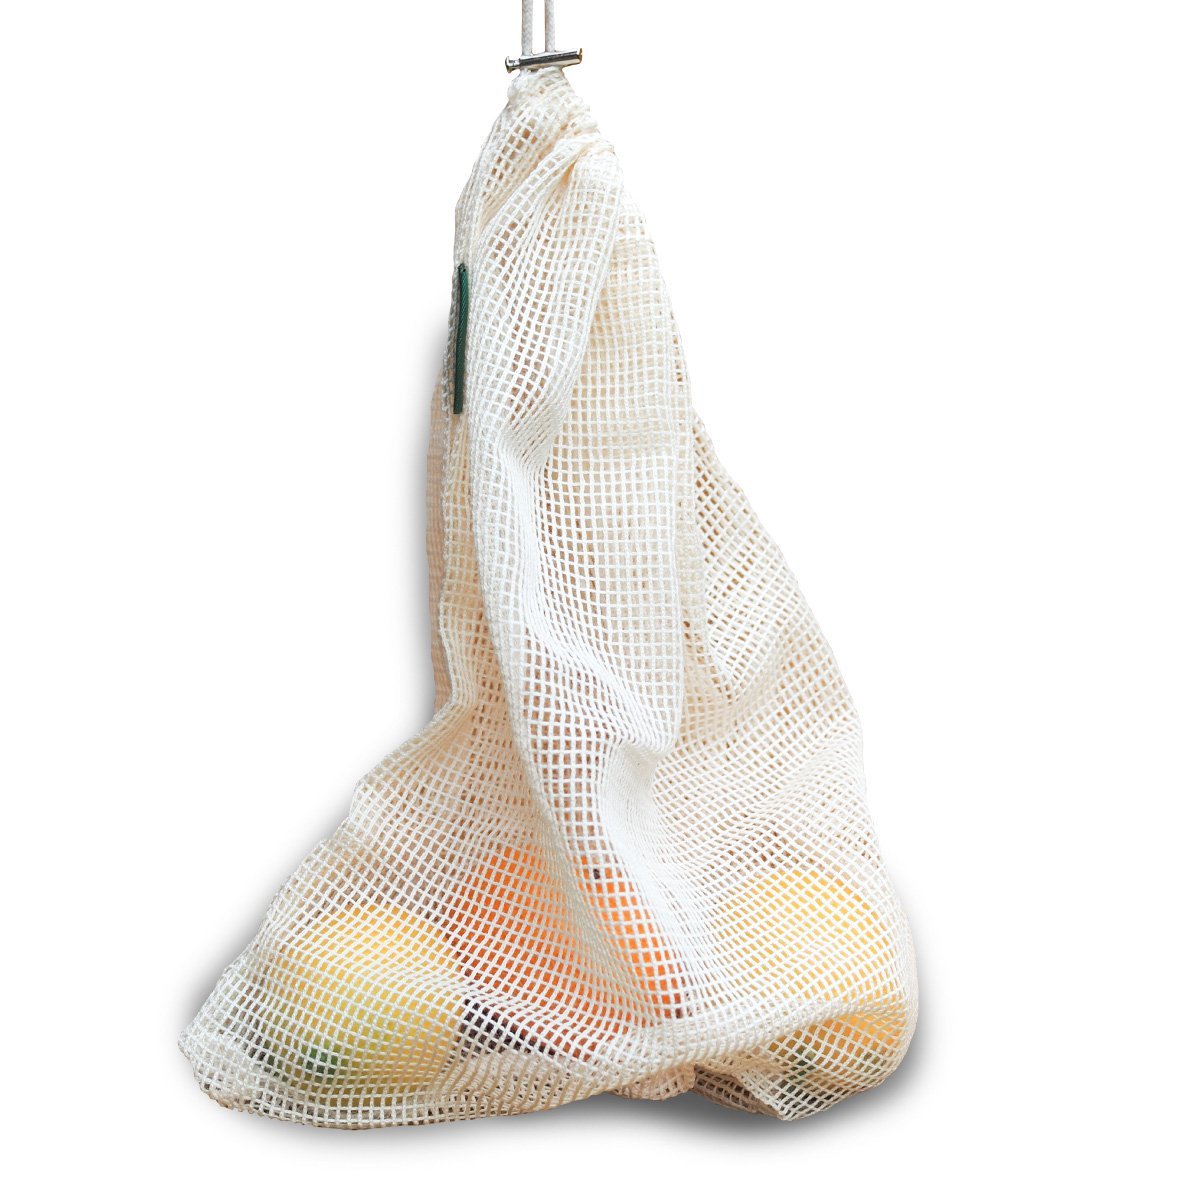 Brush It On Reusable Mesh Produce Bags: 2 Pack